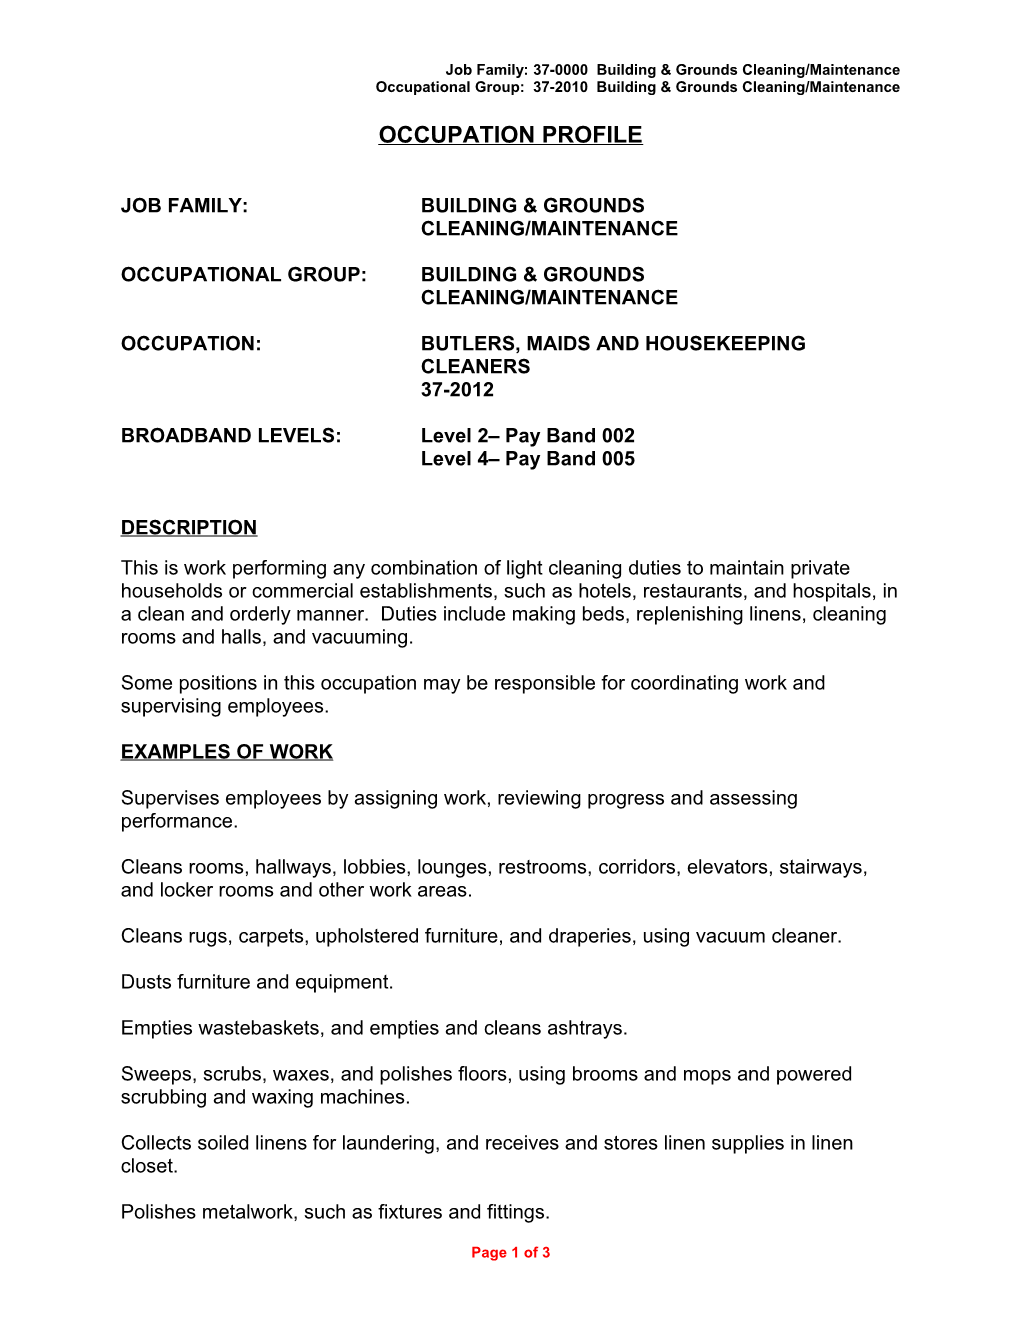 Job Family: 37-0000 Building & Grounds Cleaning/Maintenance